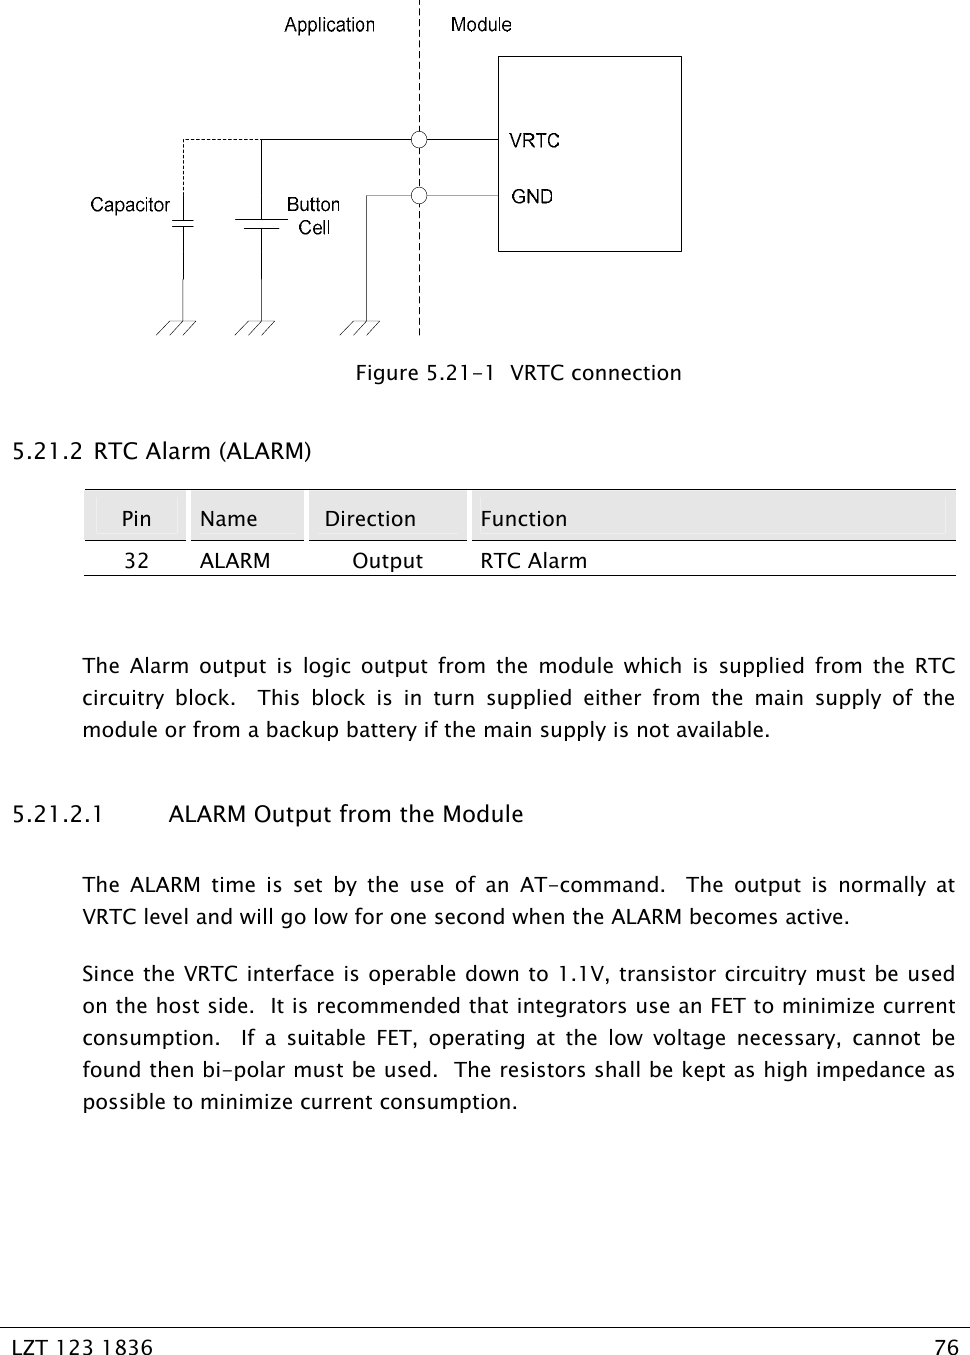   LZT 123 1836  76     Figure 5.21-1  VRTC connection 5.21.2  RTC Alarm (ALARM) Pin  Name   Direction  Function 32 ALARM  Output  RTC Alarm  The Alarm output is logic output from the module which is supplied from the RTC circuitry block.  This block is in turn supplied either from the main supply of the module or from a backup battery if the main supply is not available. 5.21.2.1  ALARM Output from the Module The ALARM time is set by the use of an AT-command.  The output is normally at VRTC level and will go low for one second when the ALARM becomes active.  Since the VRTC interface is operable down to 1.1V, transistor circuitry must be used on the host side.  It is recommended that integrators use an FET to minimize current consumption.  If a suitable FET, operating at the low voltage necessary, cannot be found then bi-polar must be used.  The resistors shall be kept as high impedance as possible to minimize current consumption.  